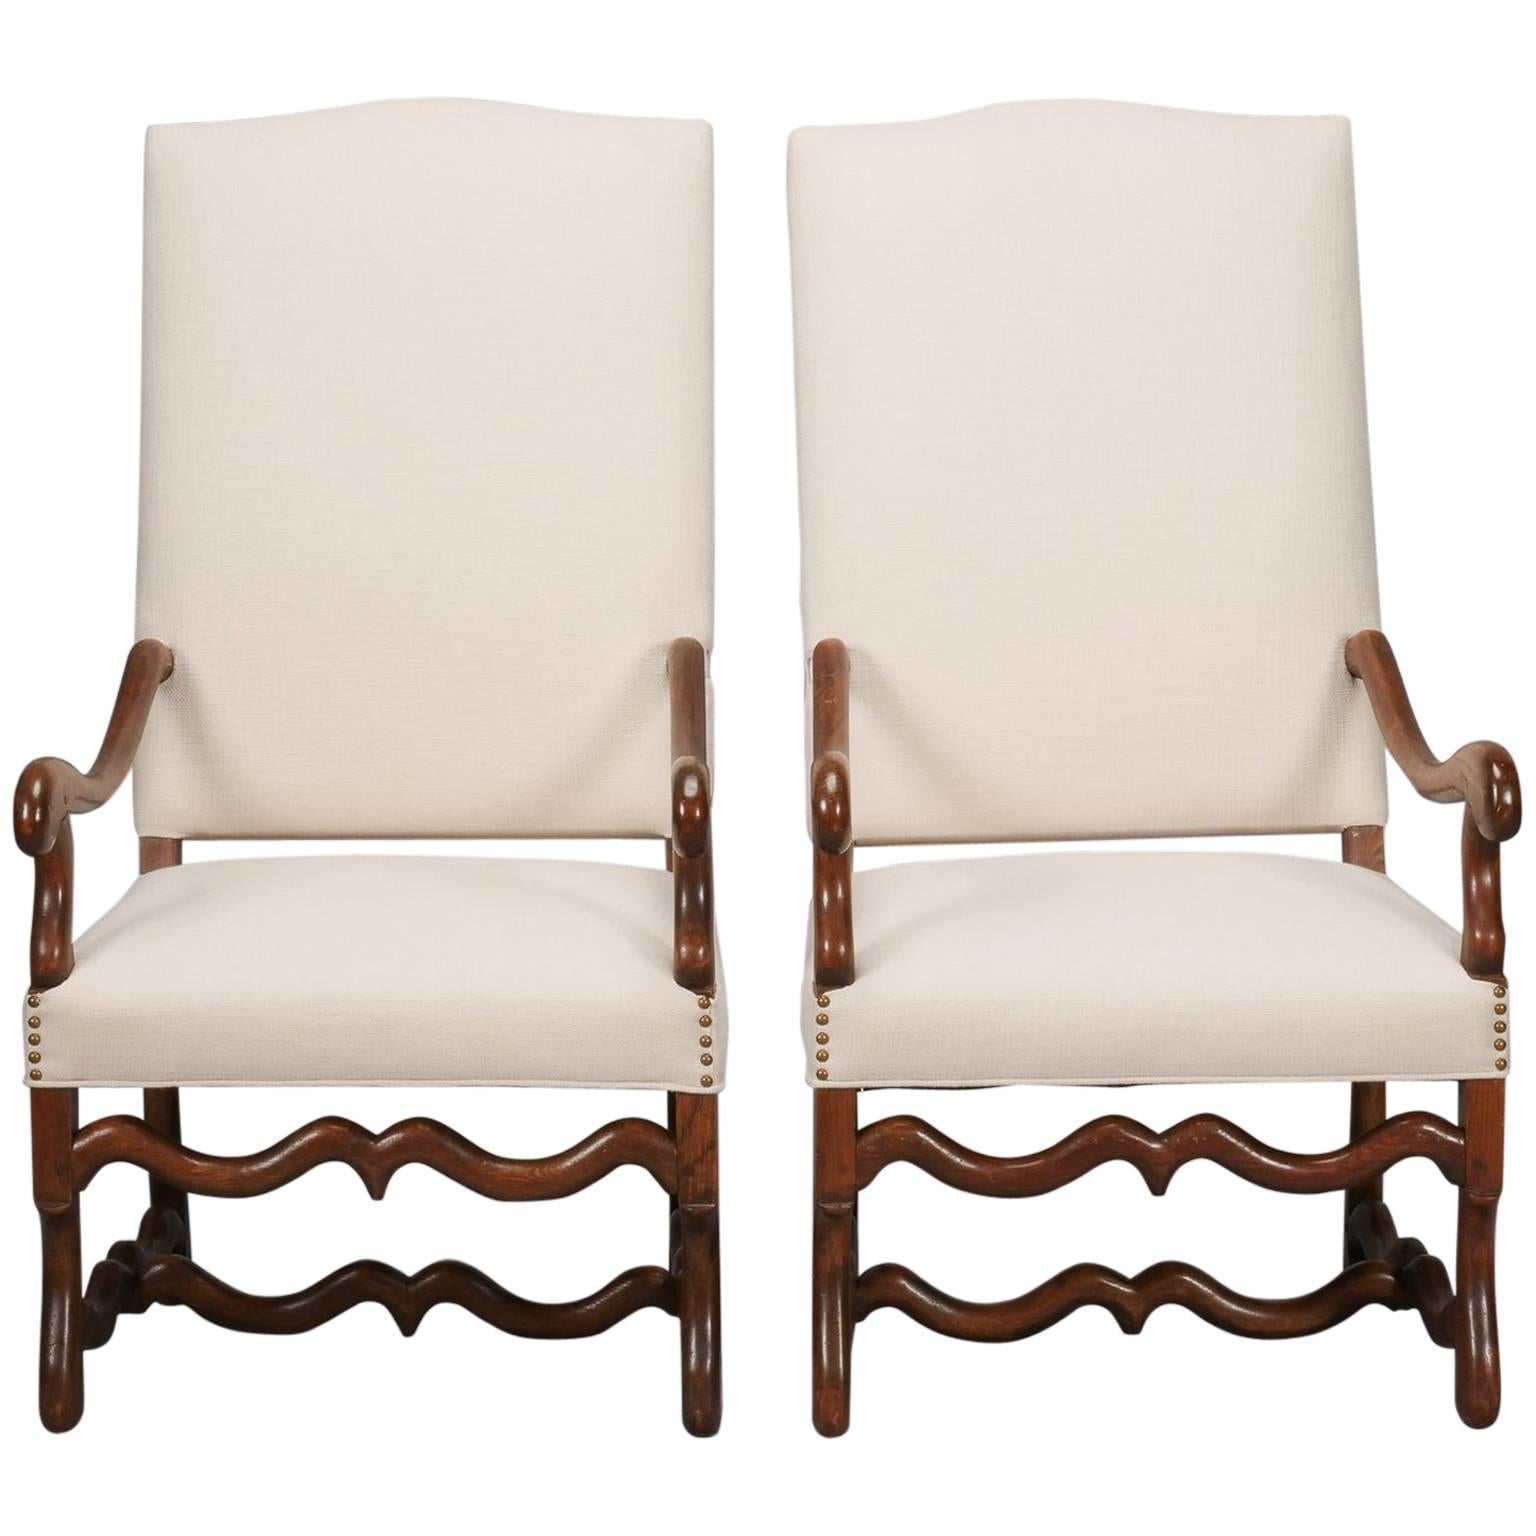 Pair of High Back Os De Mouton Arm Chairs with New Upholstery